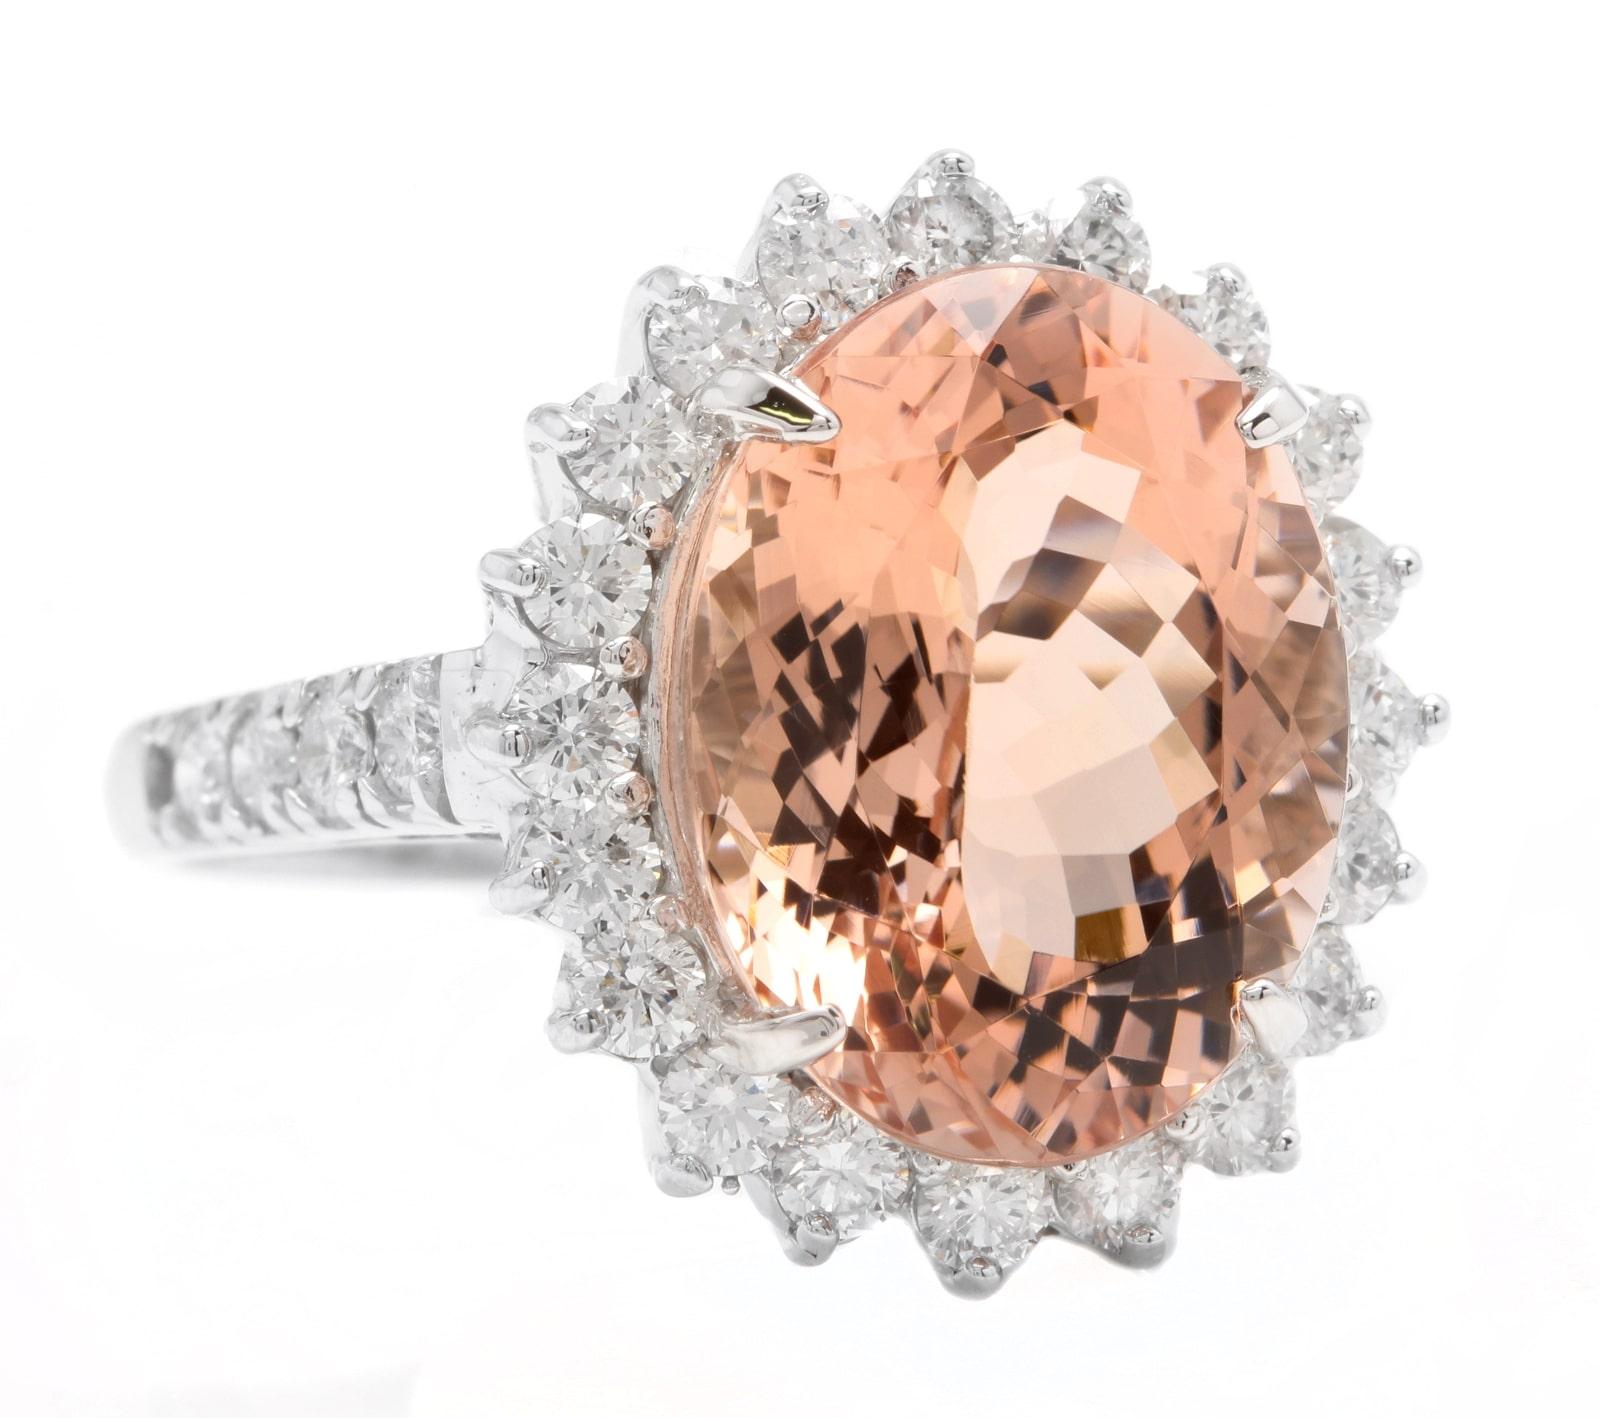 11.10 Carats Exquisite Natural Morganite and Diamond 14K Solid White Gold Ring

Suggested Replacement Value: $8,500.00

Total Natural Oval Shaped Morganite Weights: Approx. 10.00 Carats

Morganite Measures: Approx. 16.00 x 12.00mm

Natural Round